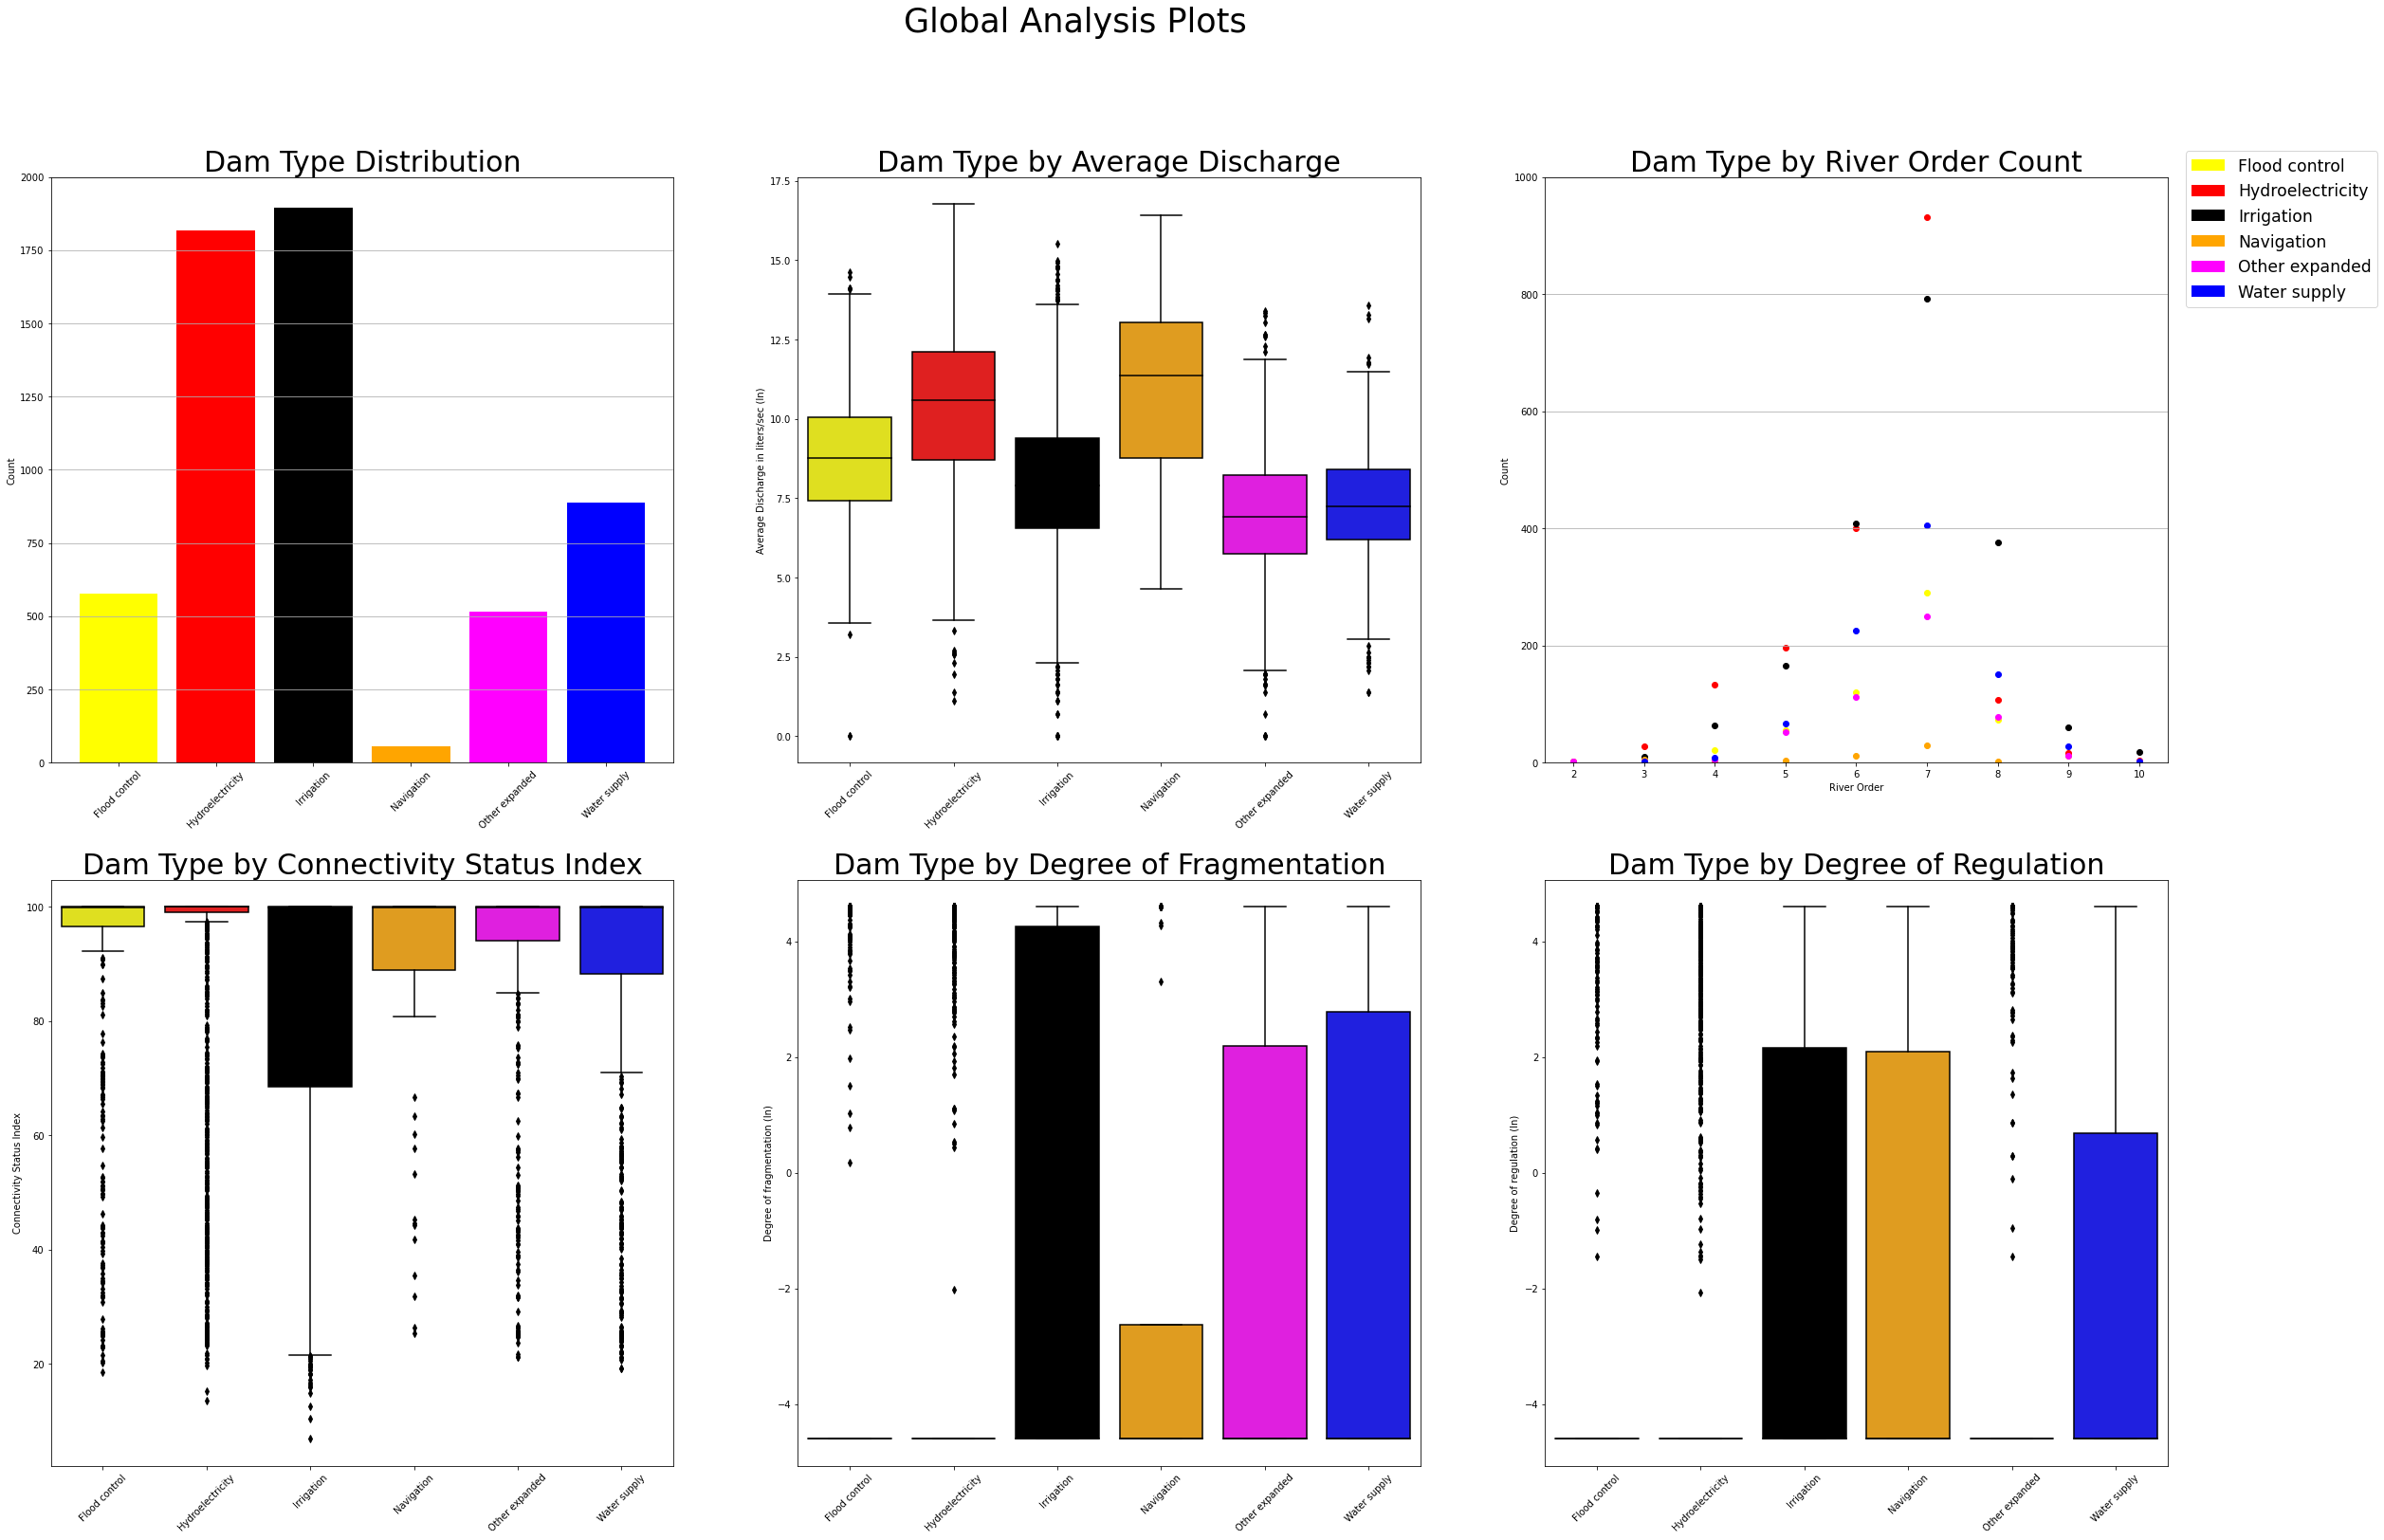 Combined Global Analyses Plots